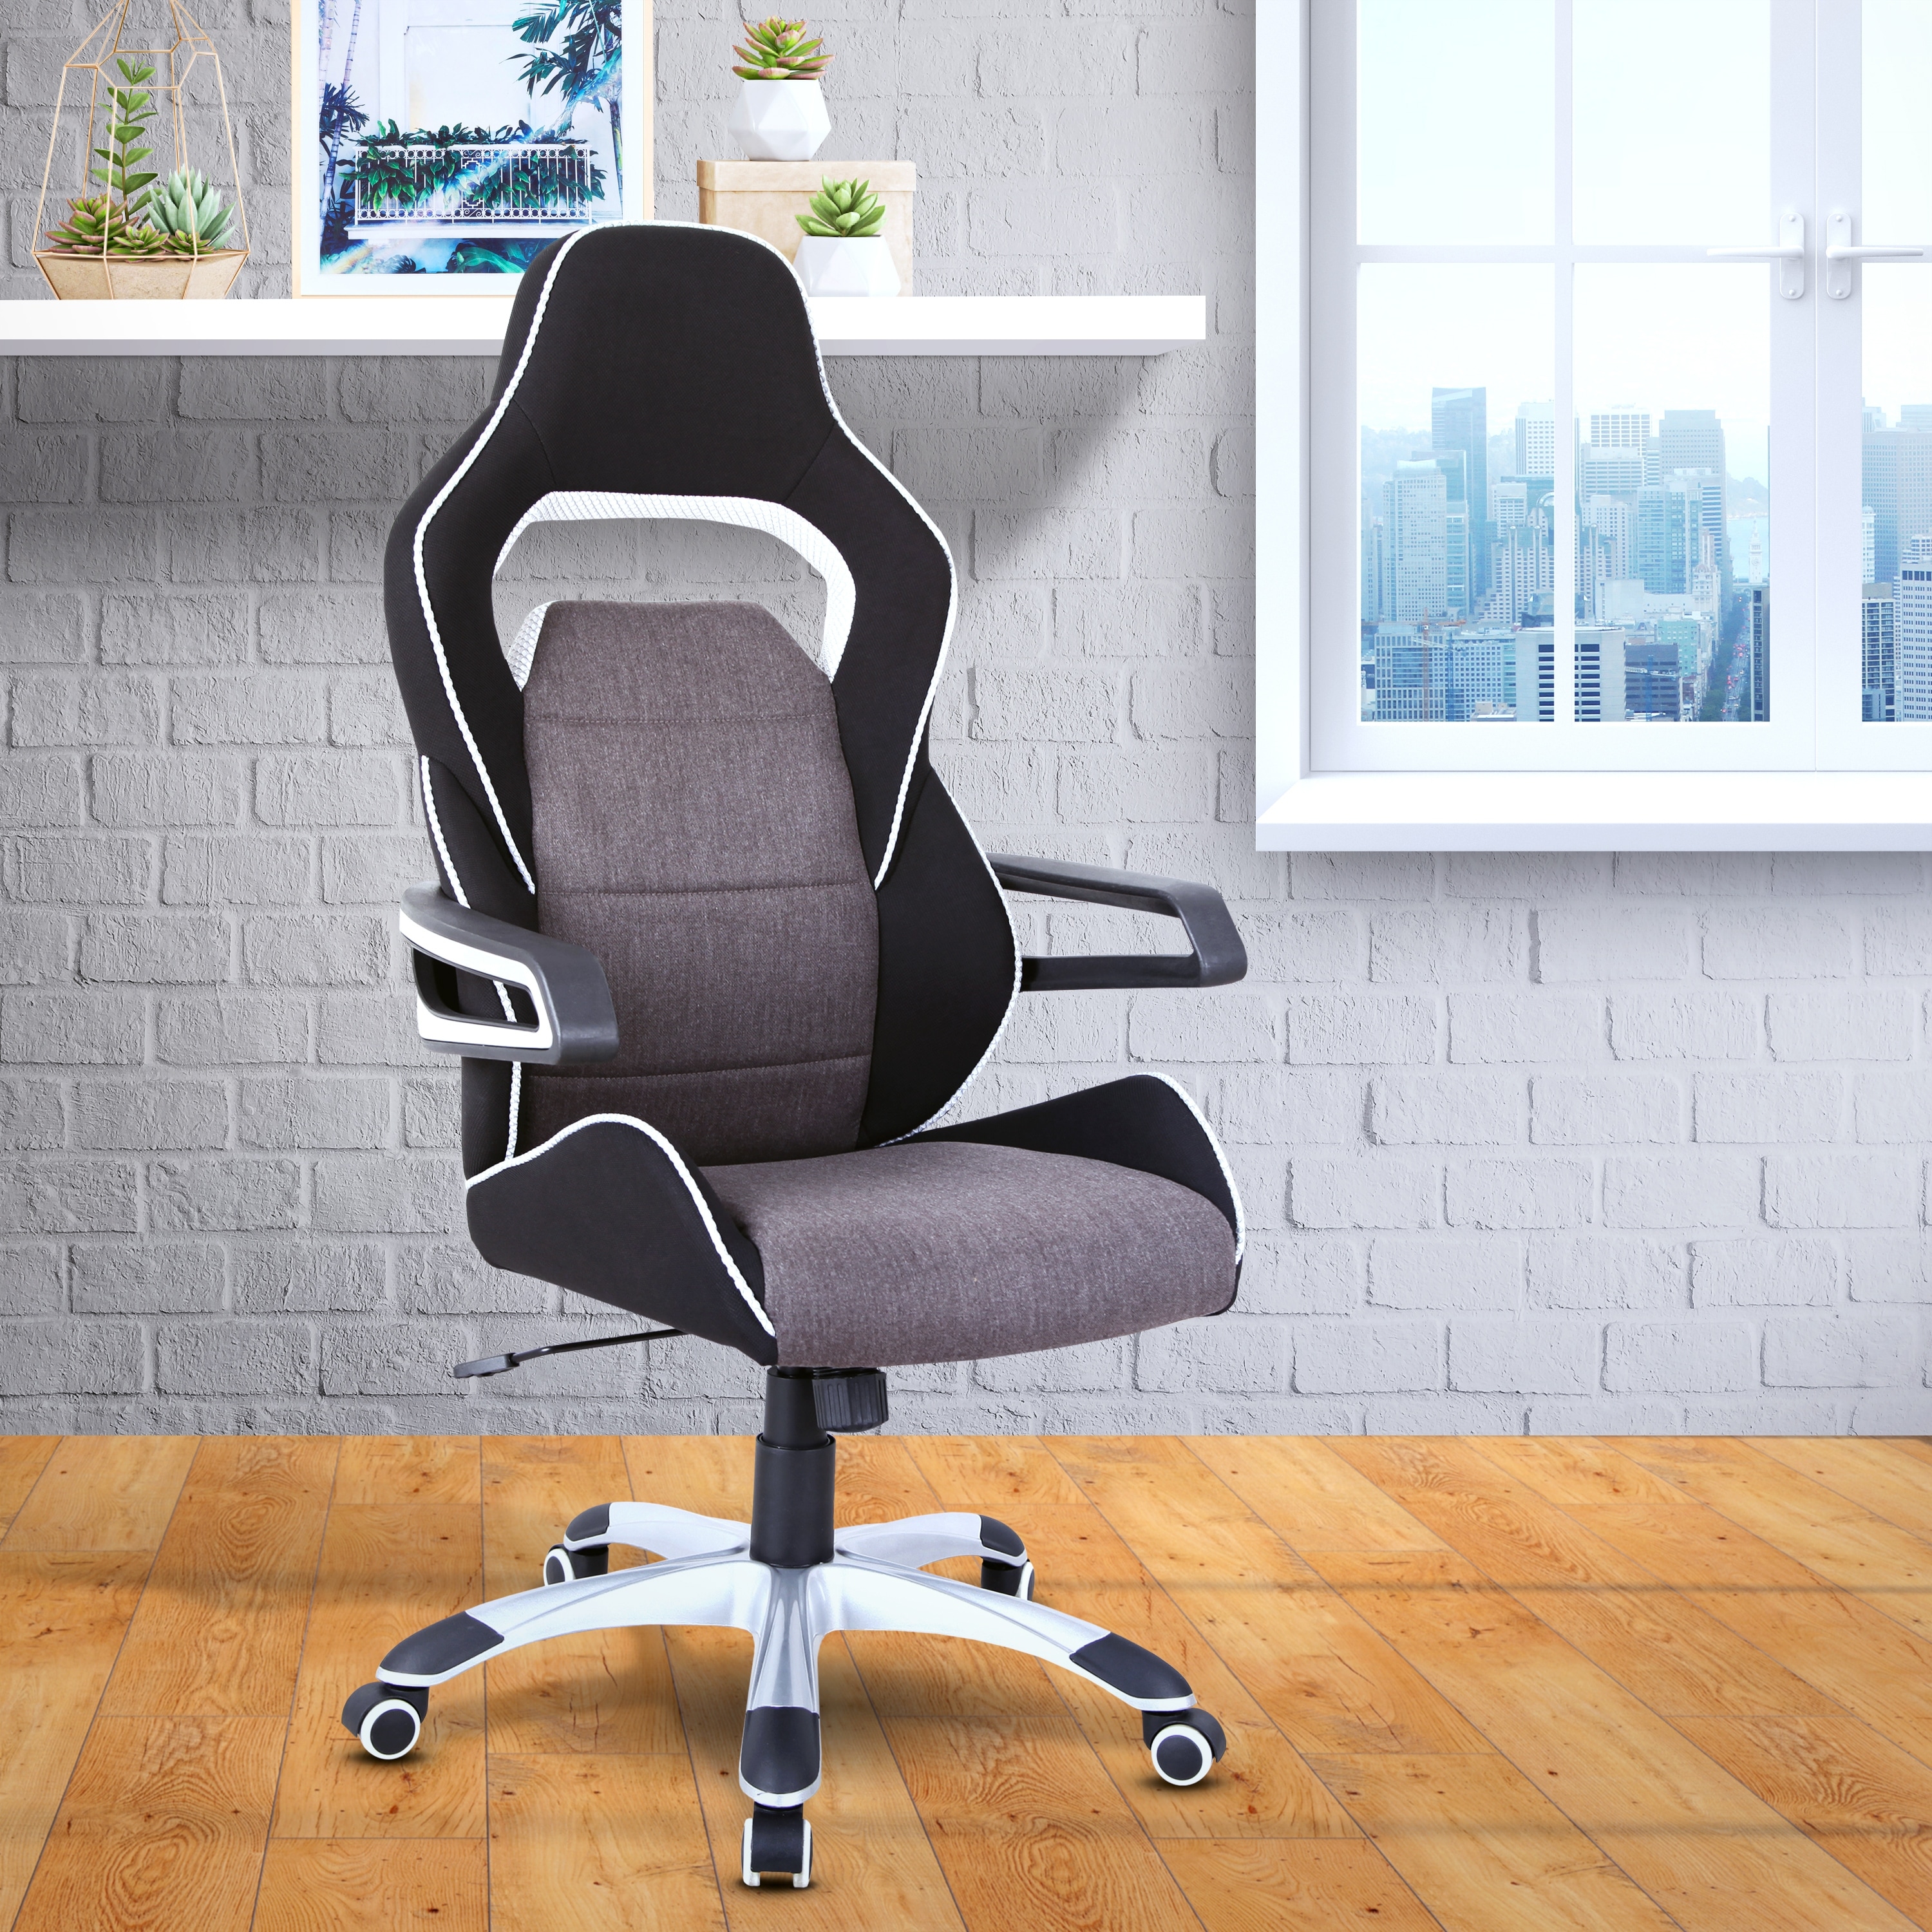 Comfort Redefined: Thick Cushion Office Chair for Optimal Support